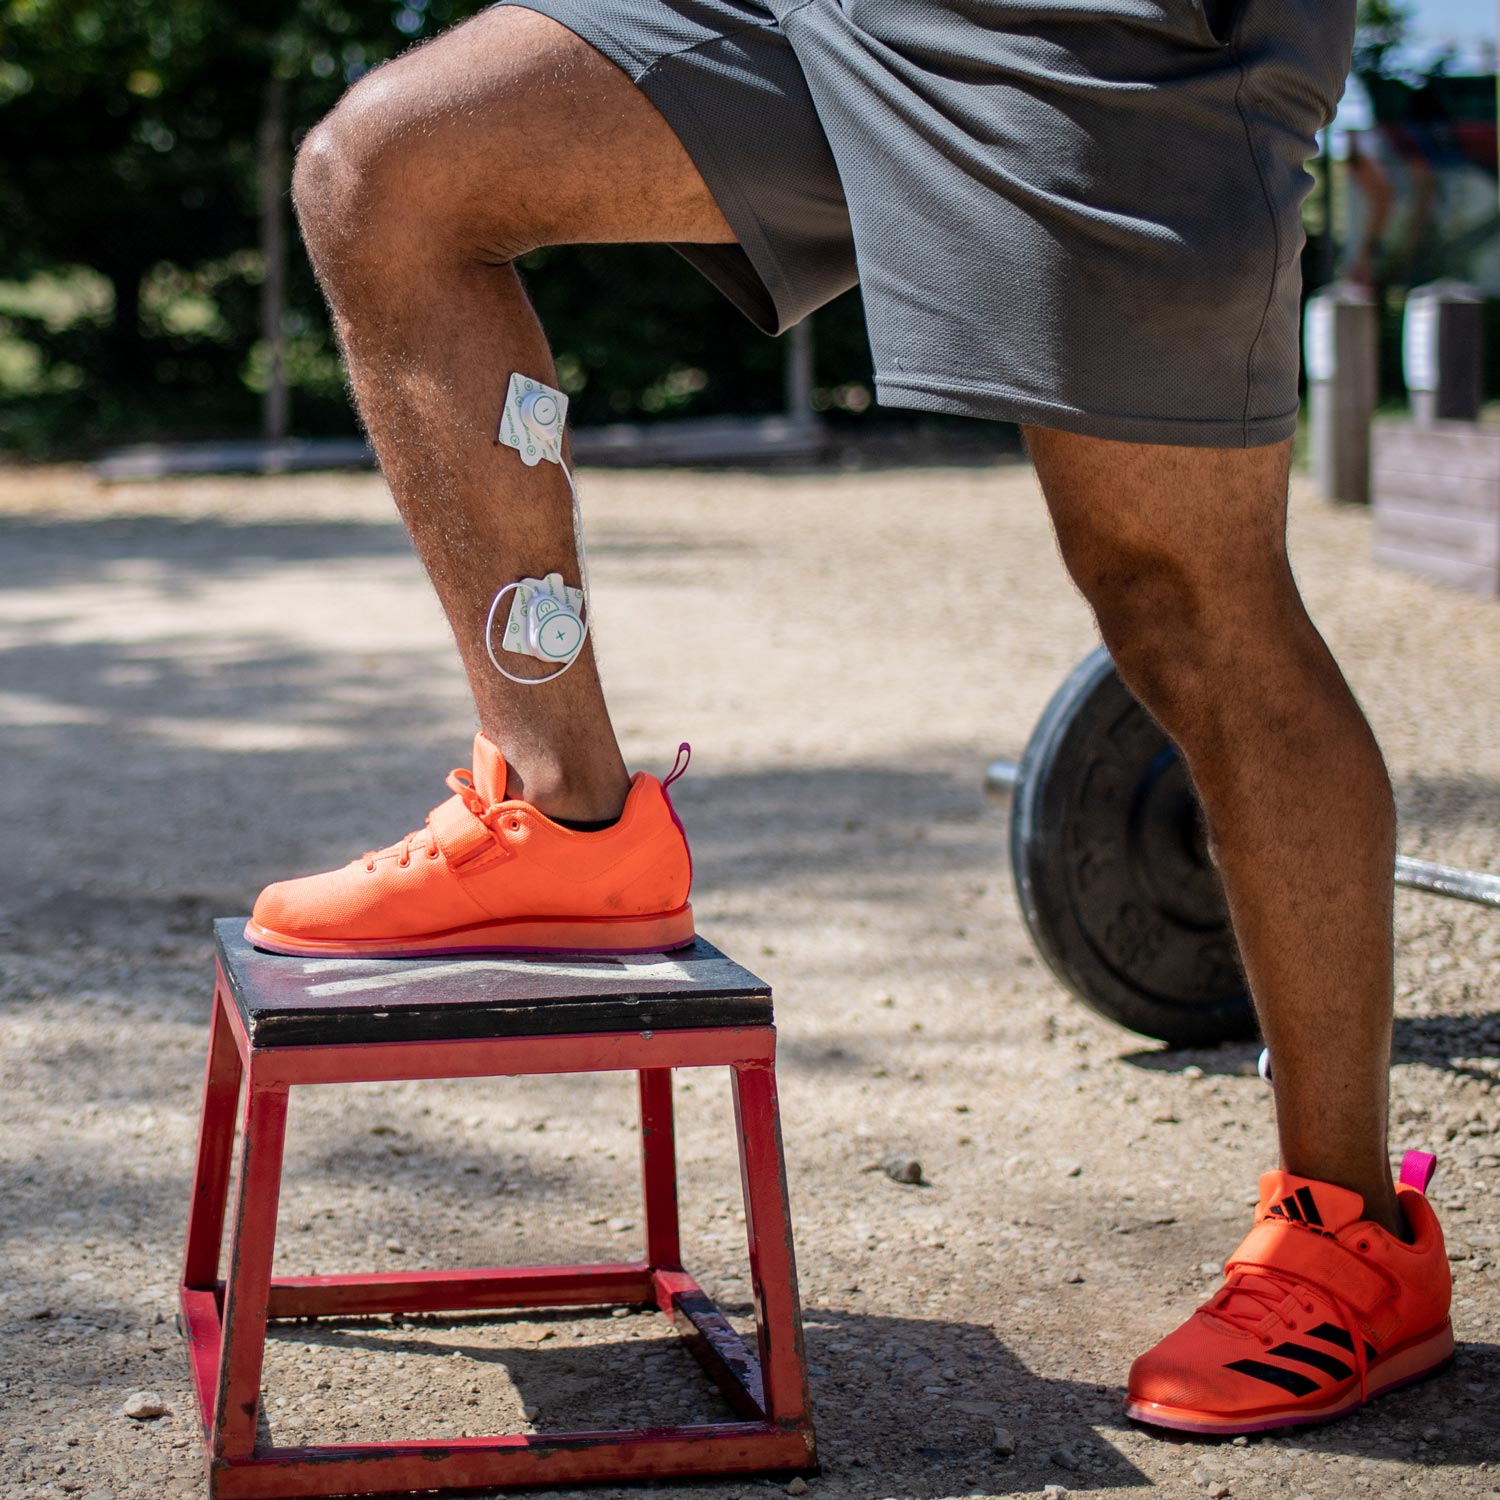 Professional athletes using nurokor mibody device for recovery on calve muscles